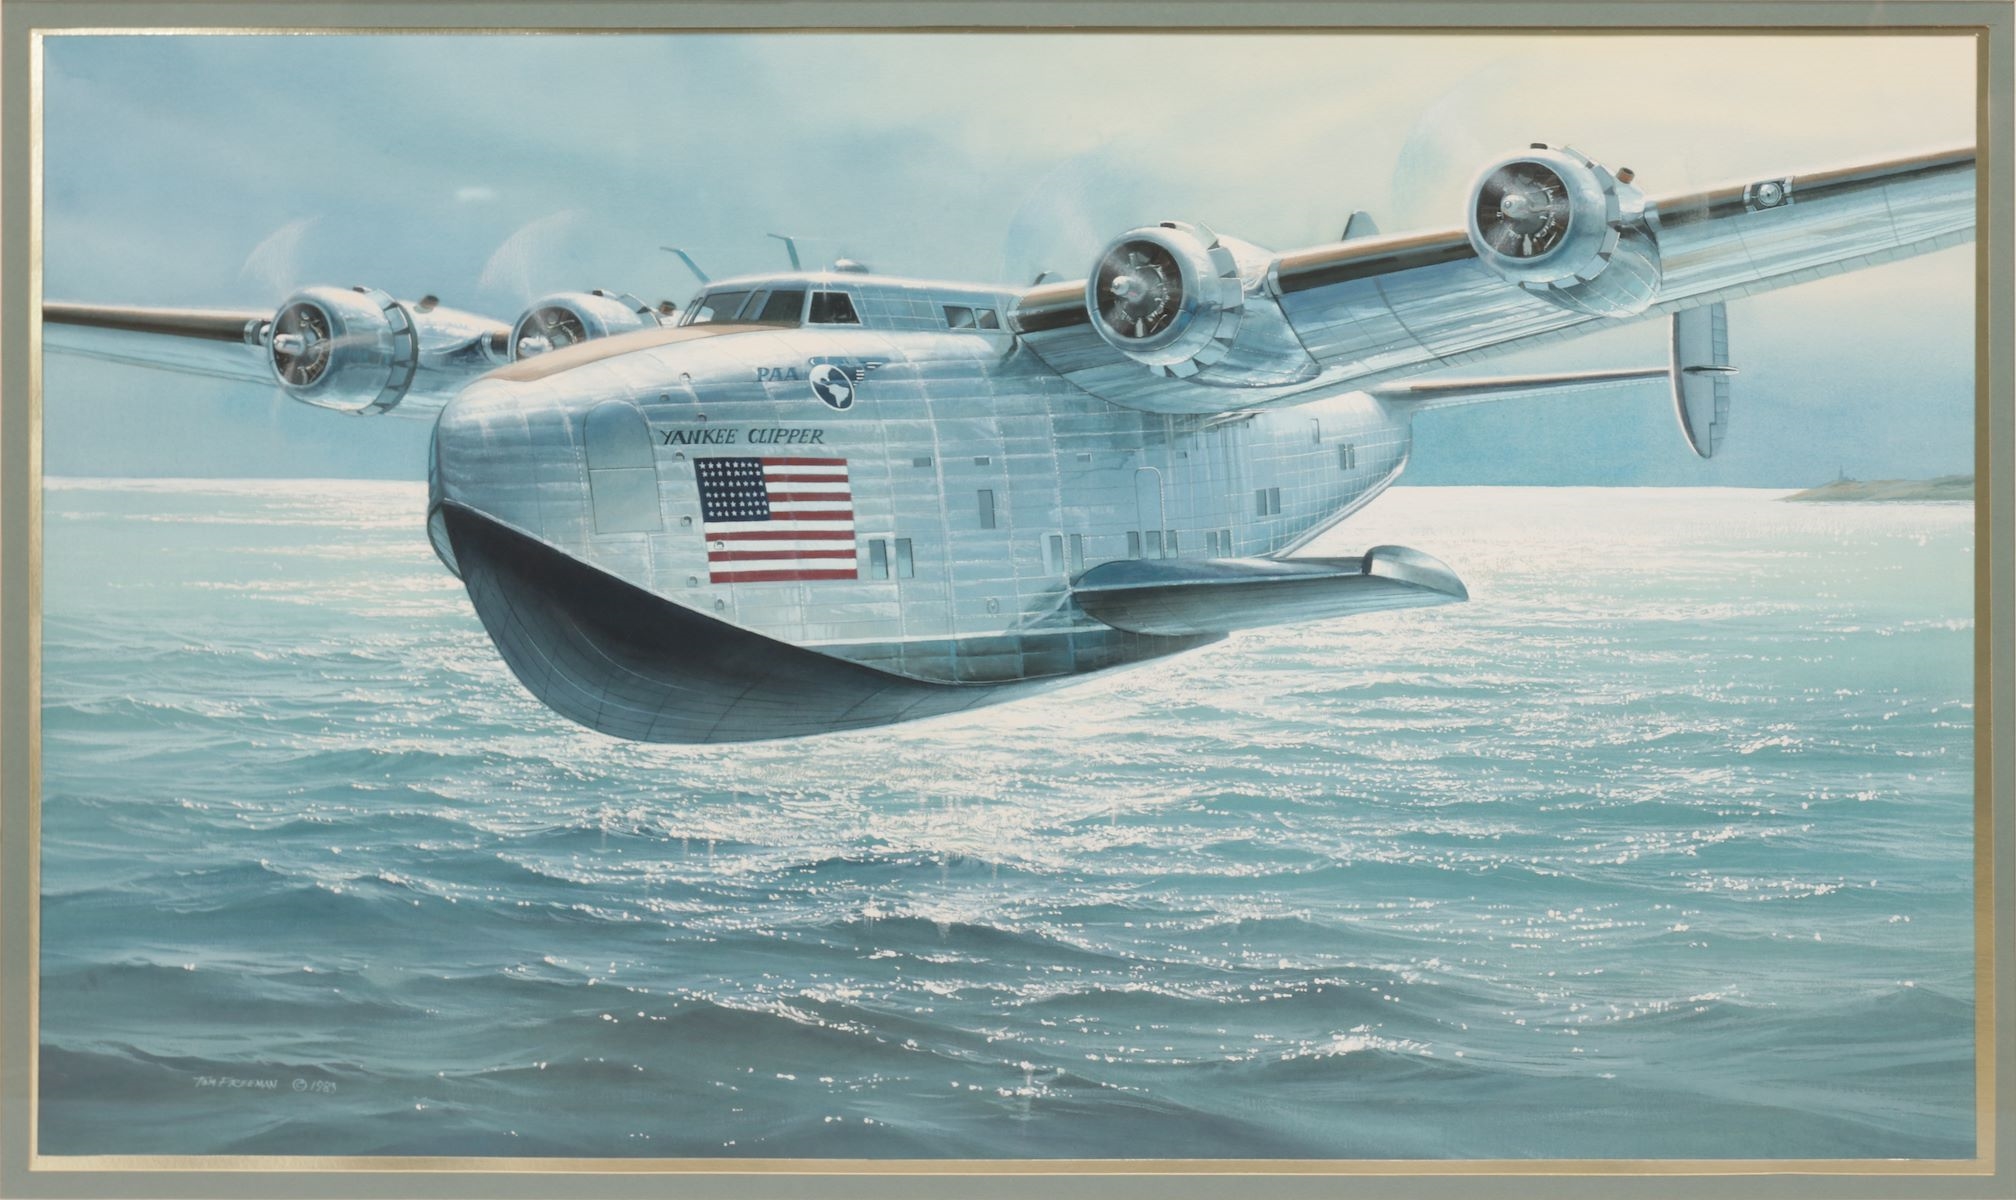 Yankee Clipper seaplane For sale as Framed Prints, Photos, Wall